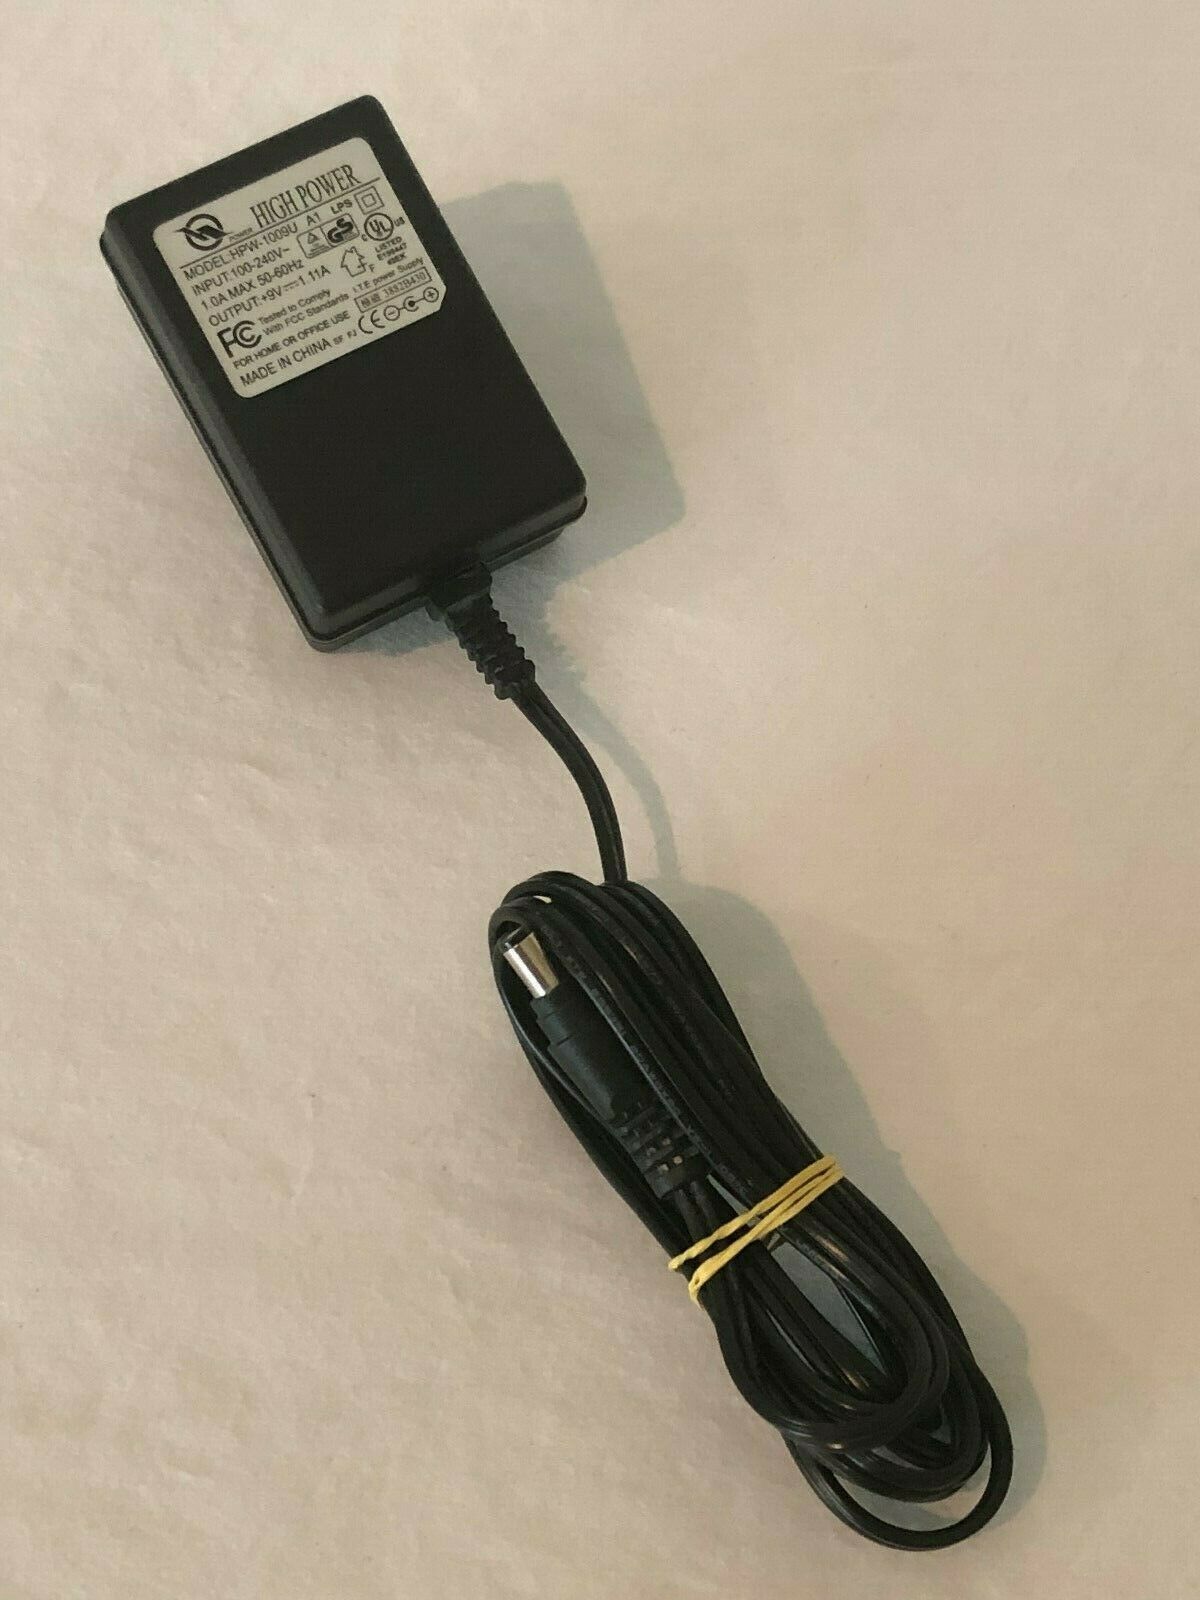 AC DC Power Supply Plug Charger Adapter High Power Model HPW-1009U 9V 1.11A Typ